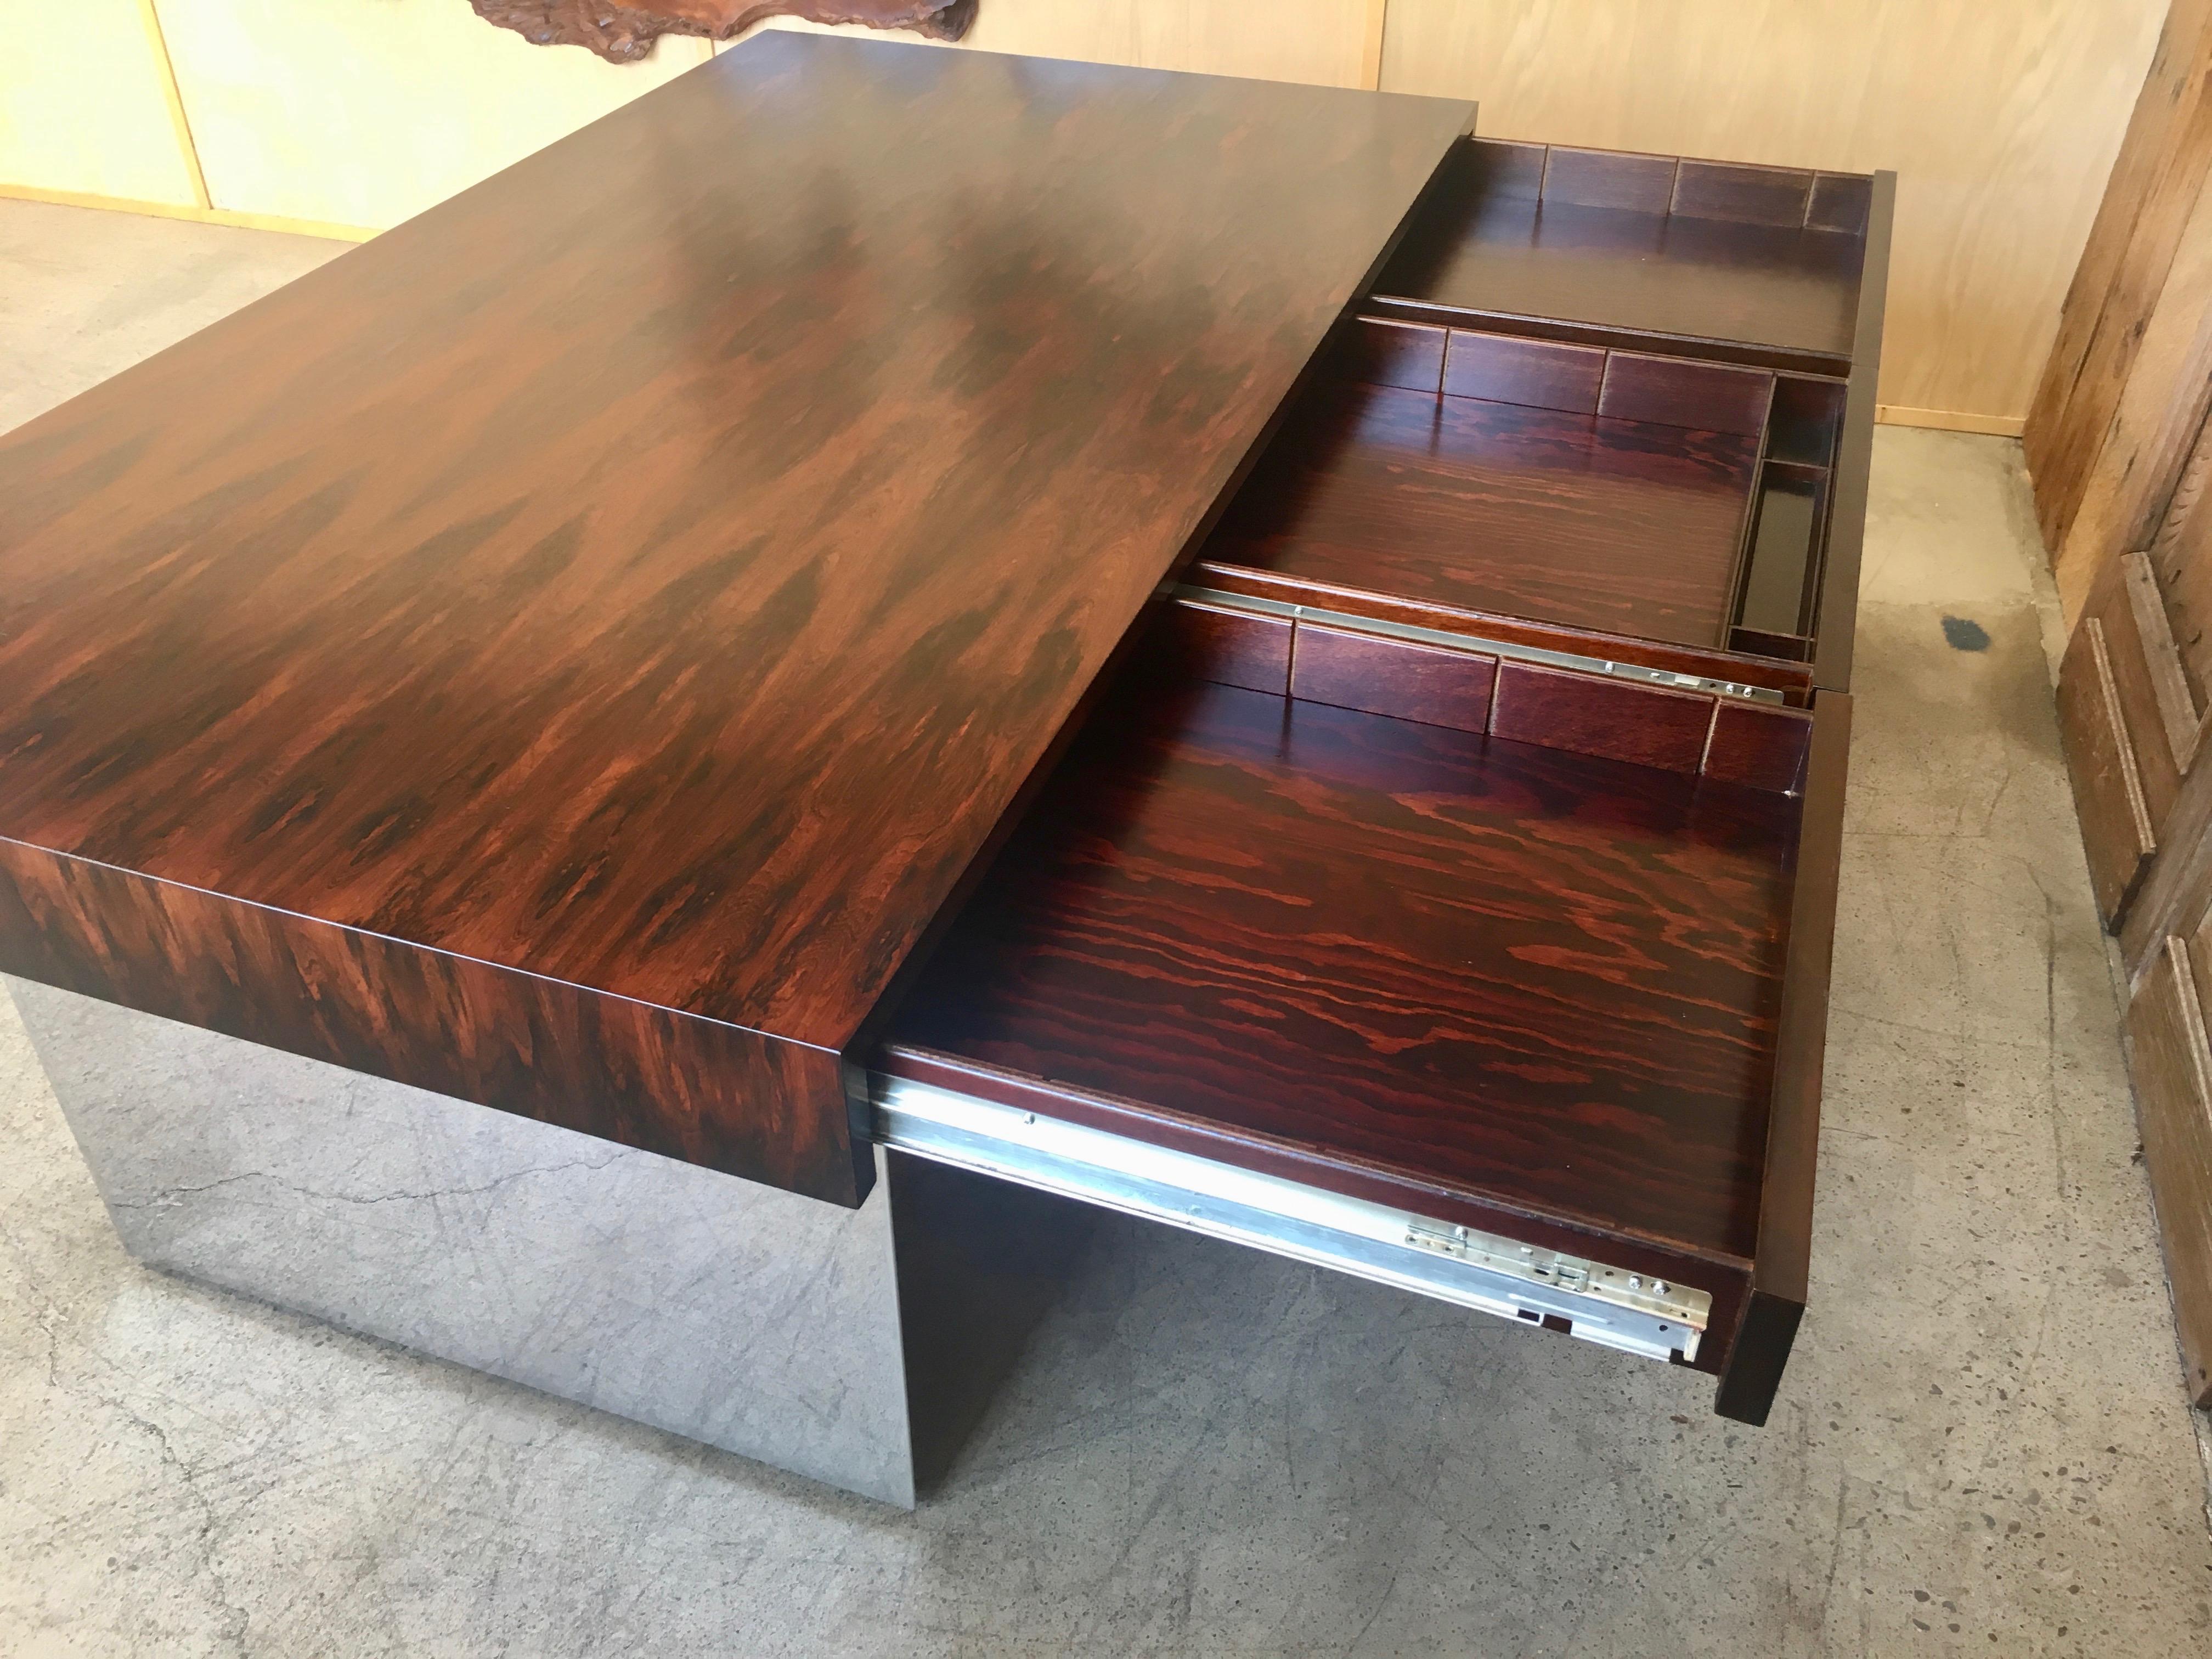 North American Rosewood and Mirror Polished Stainless Steel Executive Desk by Pace Collection